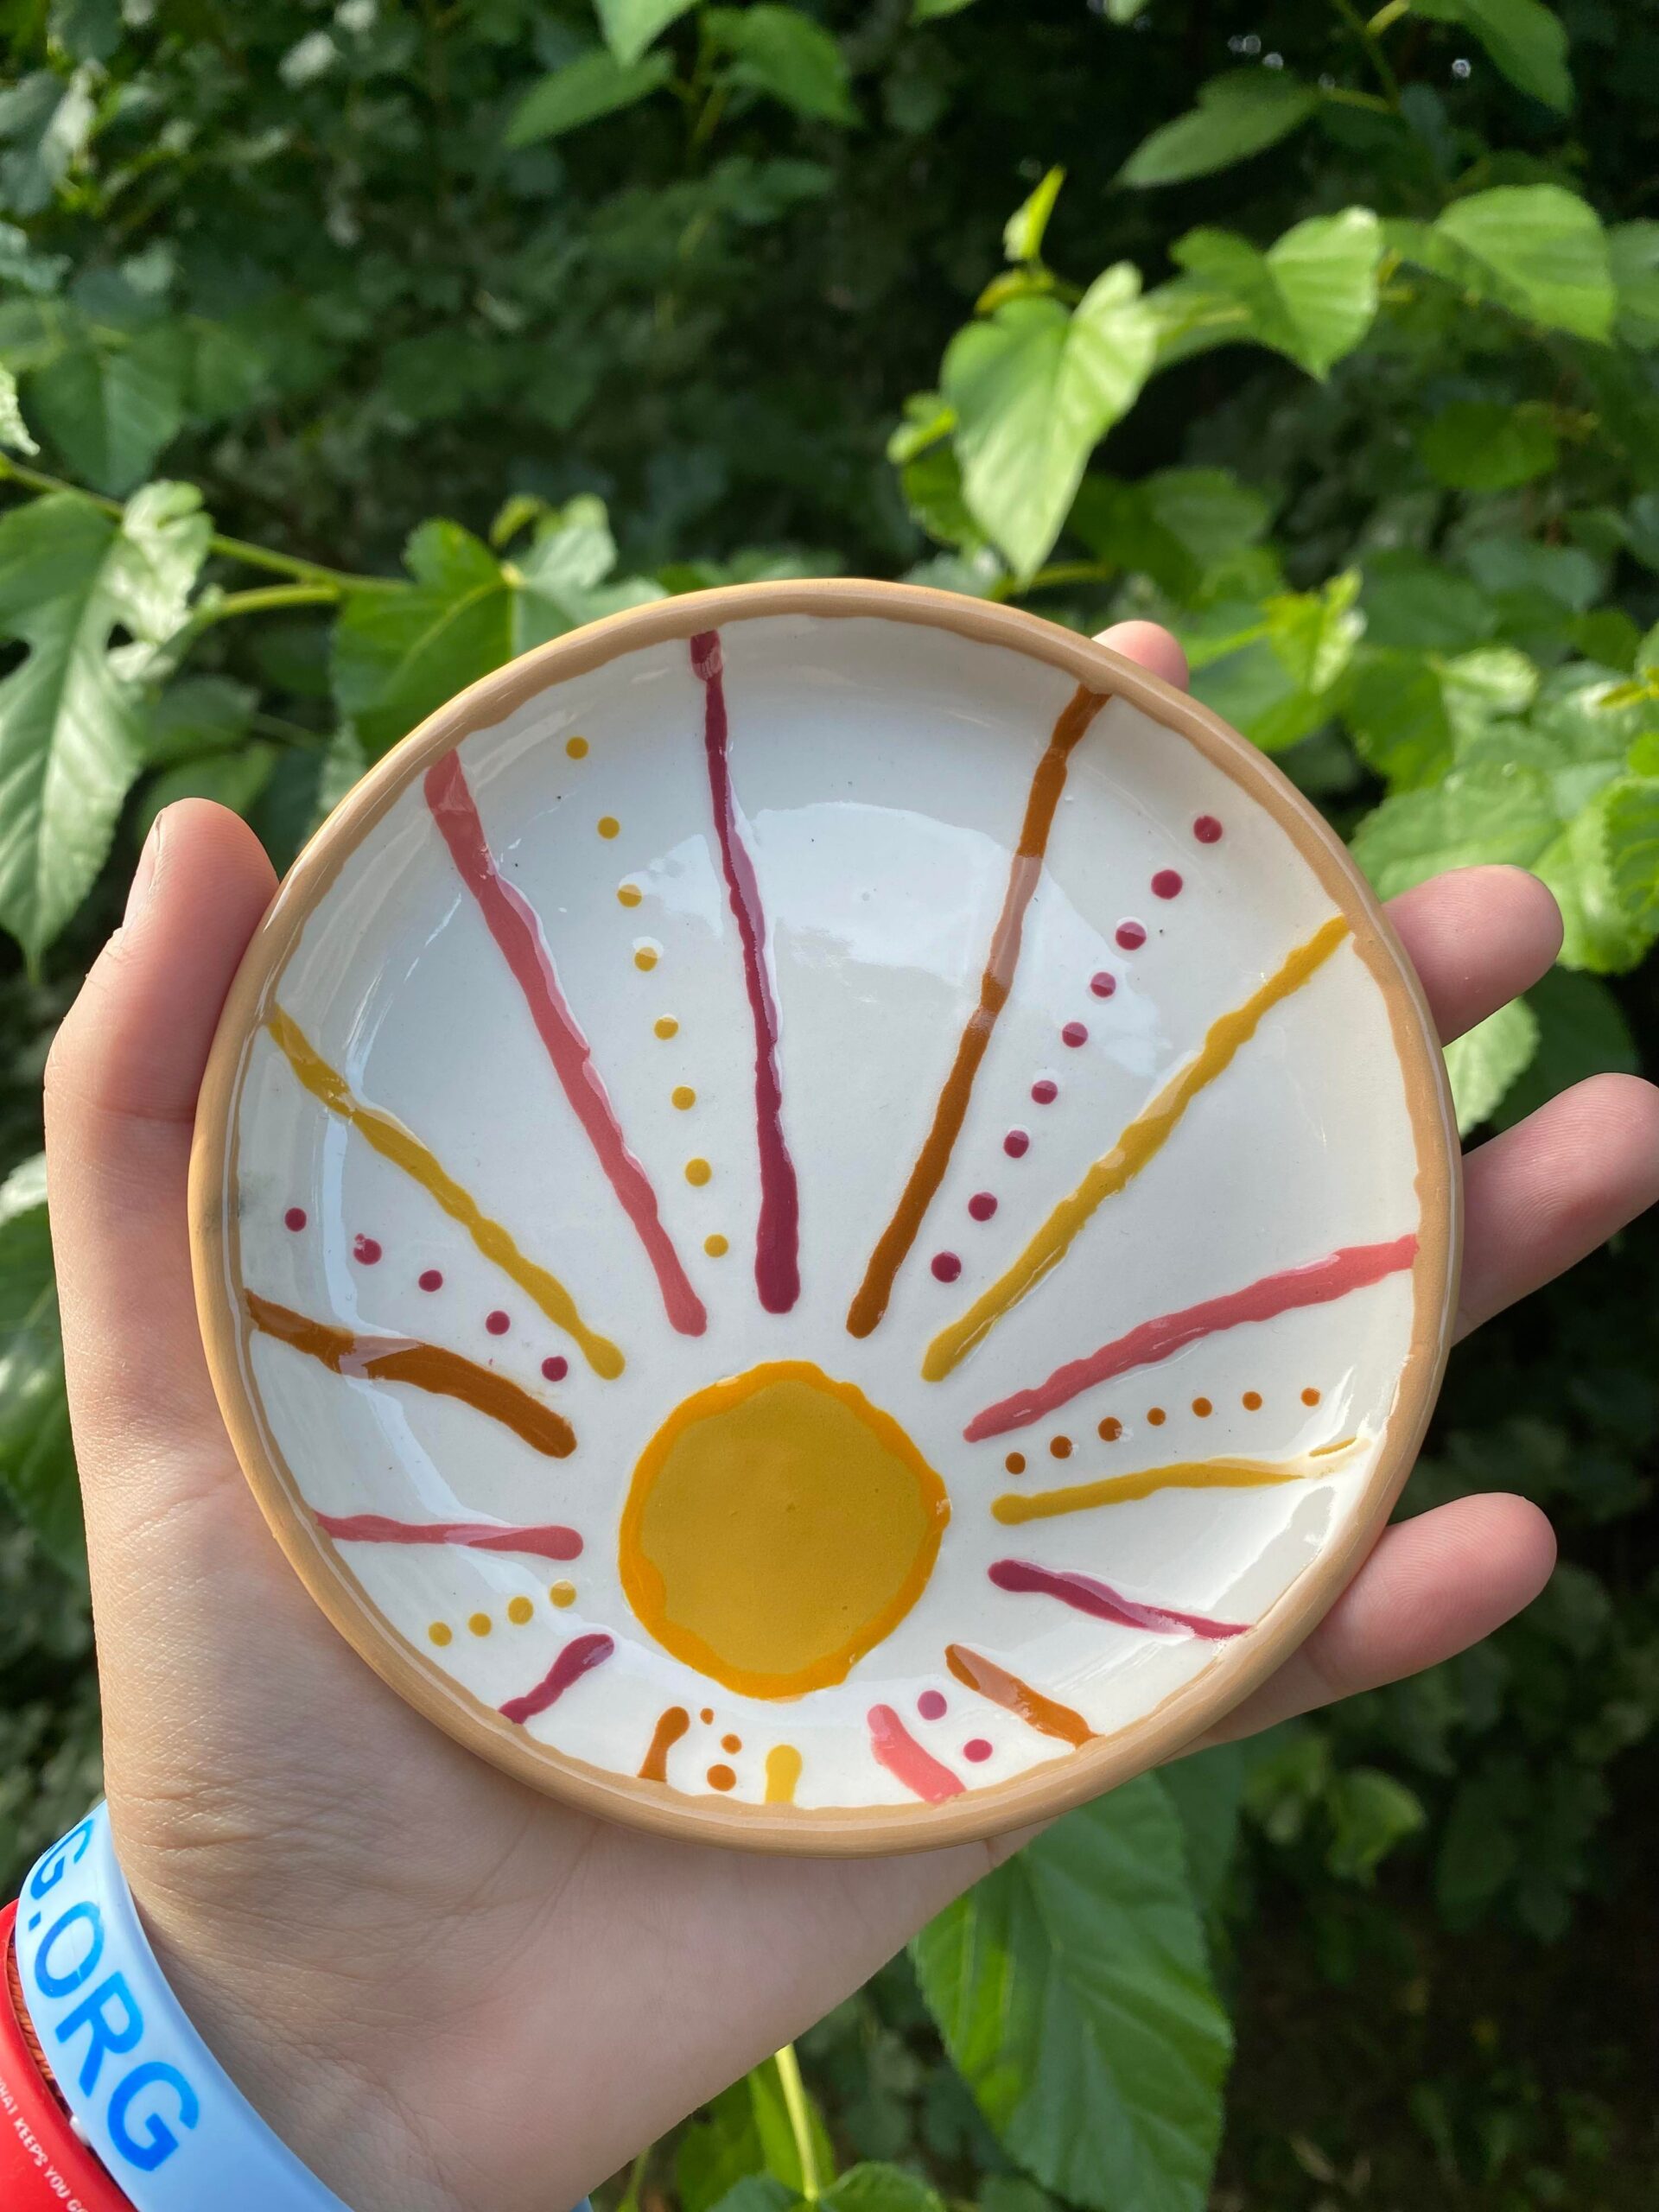 A hand holding a bowl with an orange sun design on it.